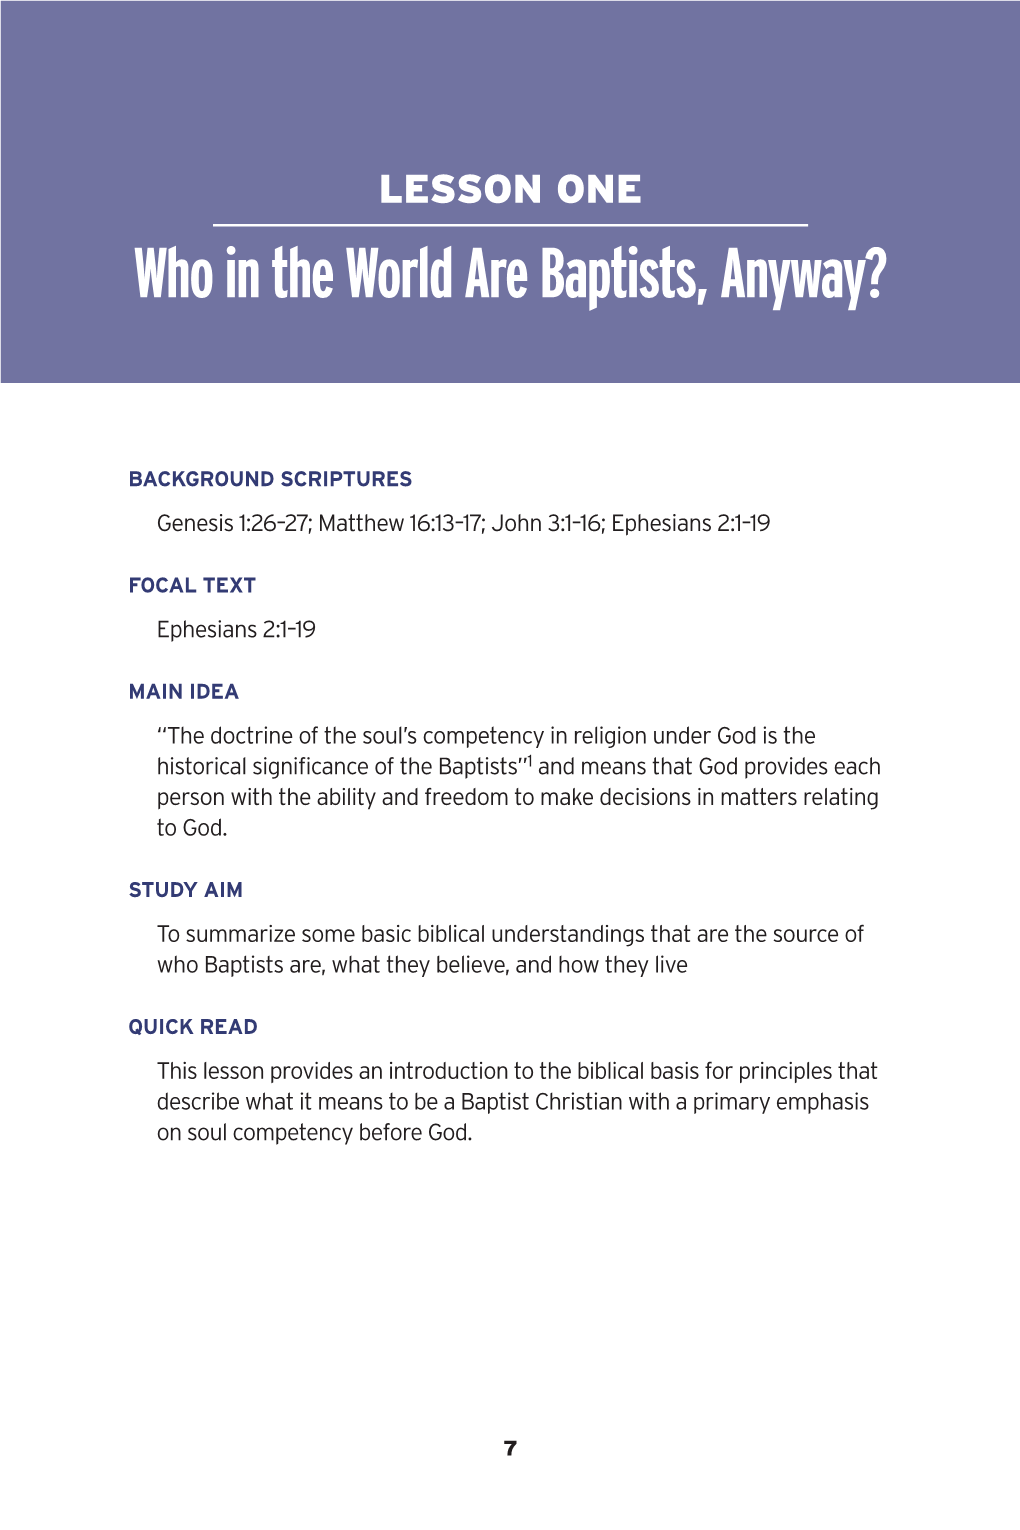 Who in the World Are Baptists, Anyway?